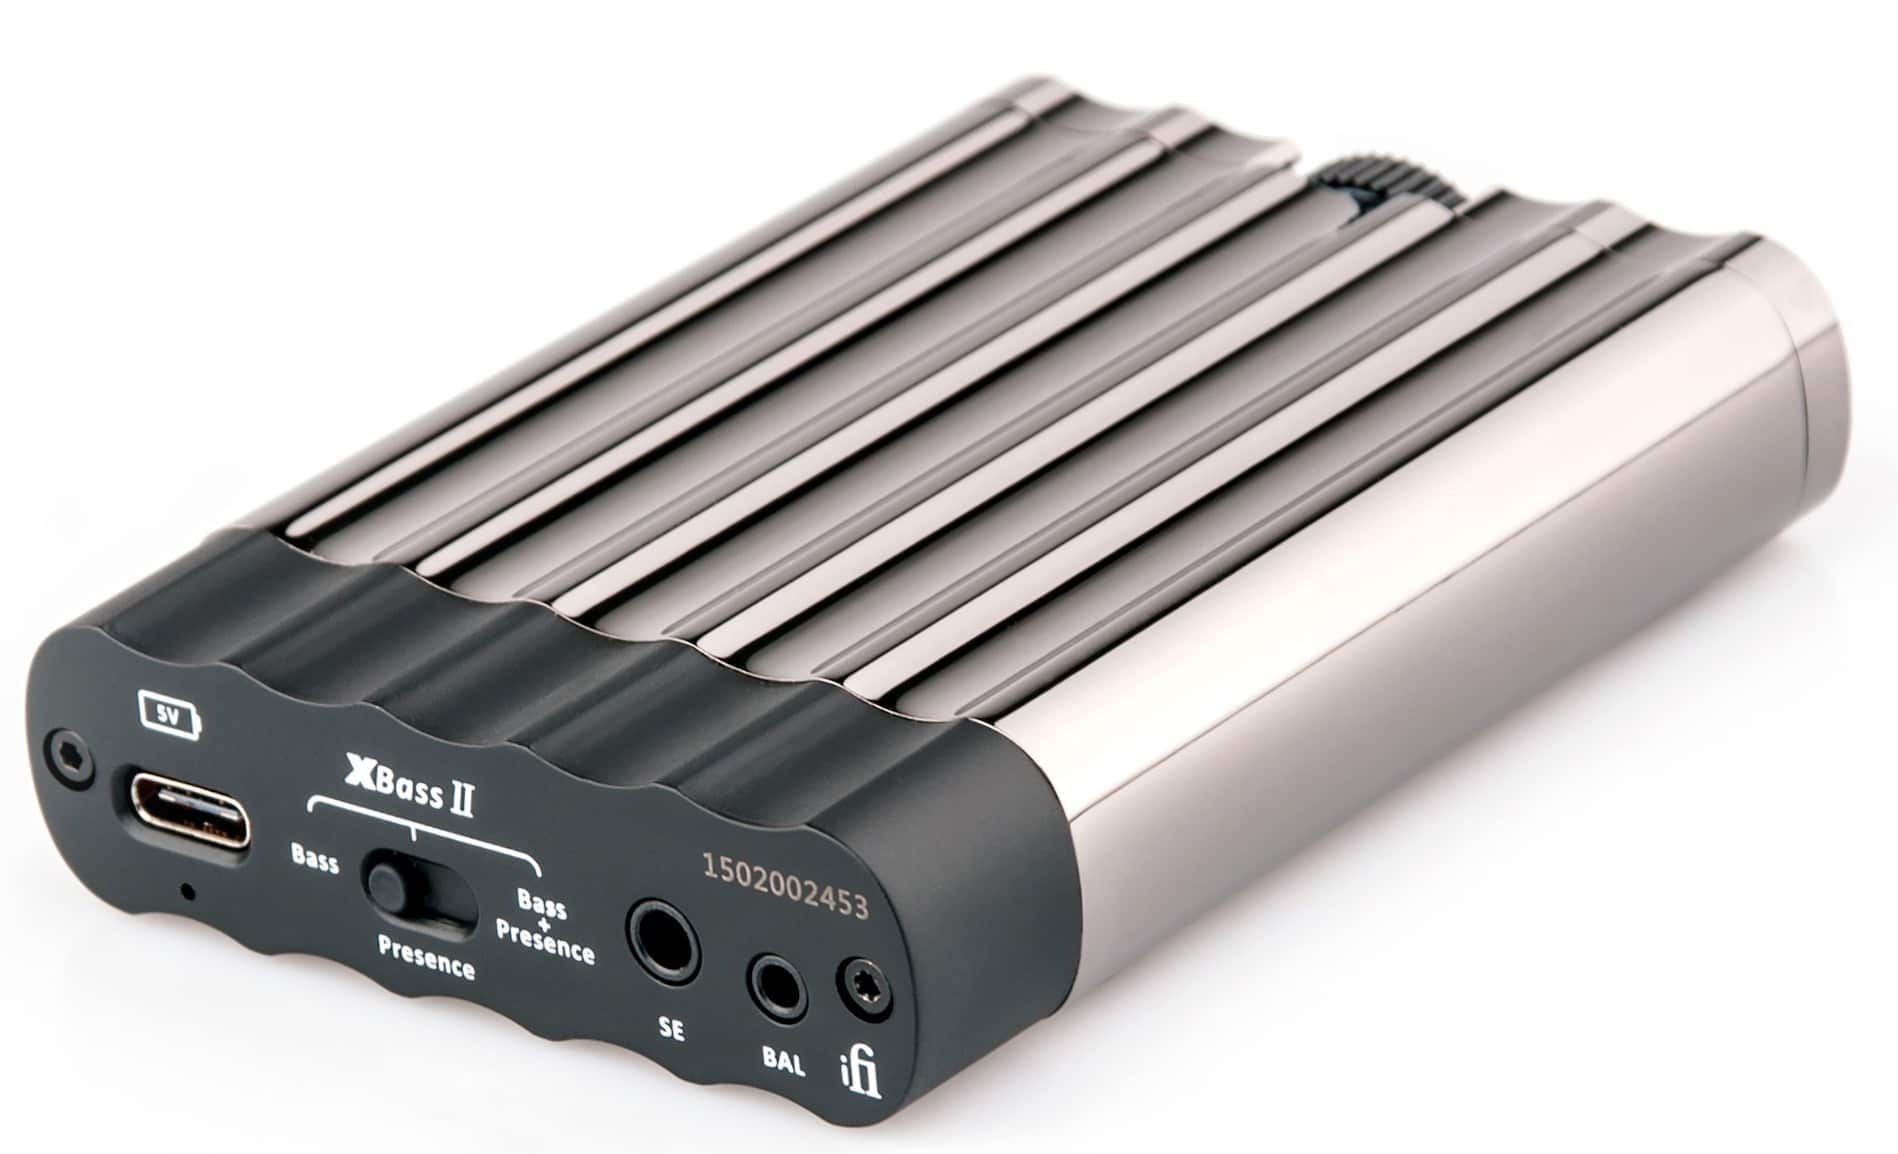 xCAN portable headphone amplifier from iFi